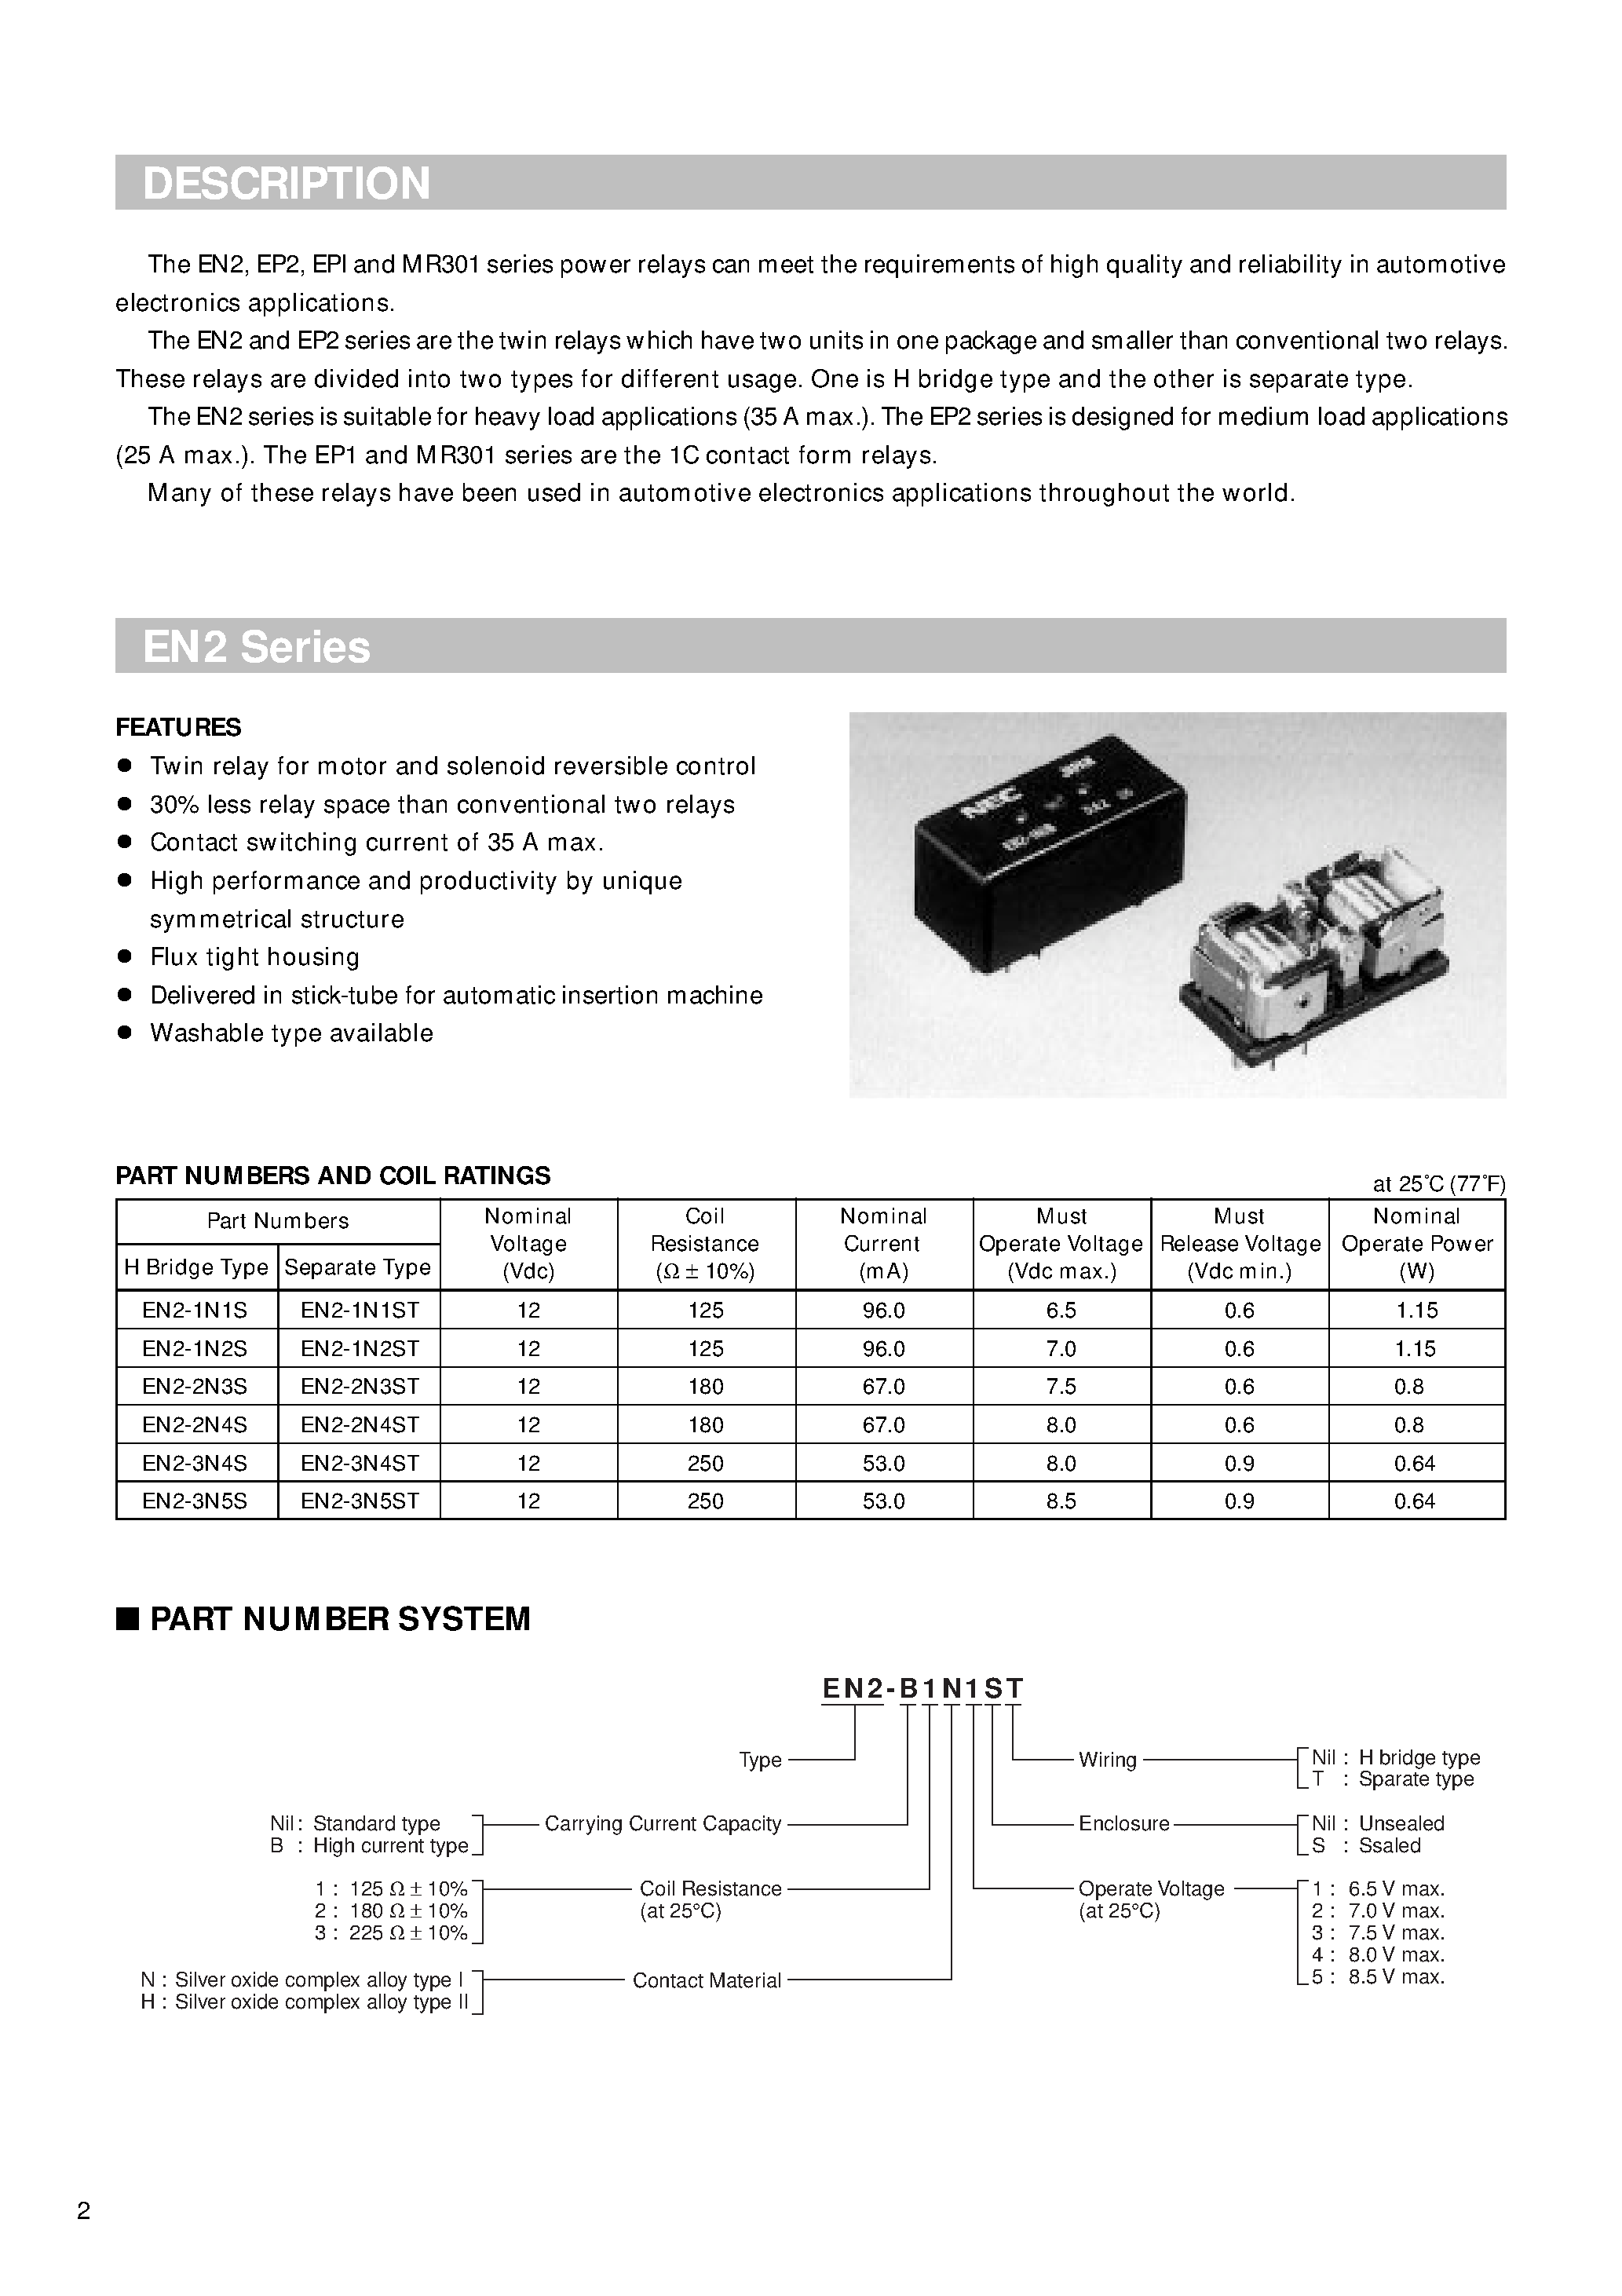 Datasheet EN2-2N3ST - Twin relay for motor and solenoid reversible control page 2